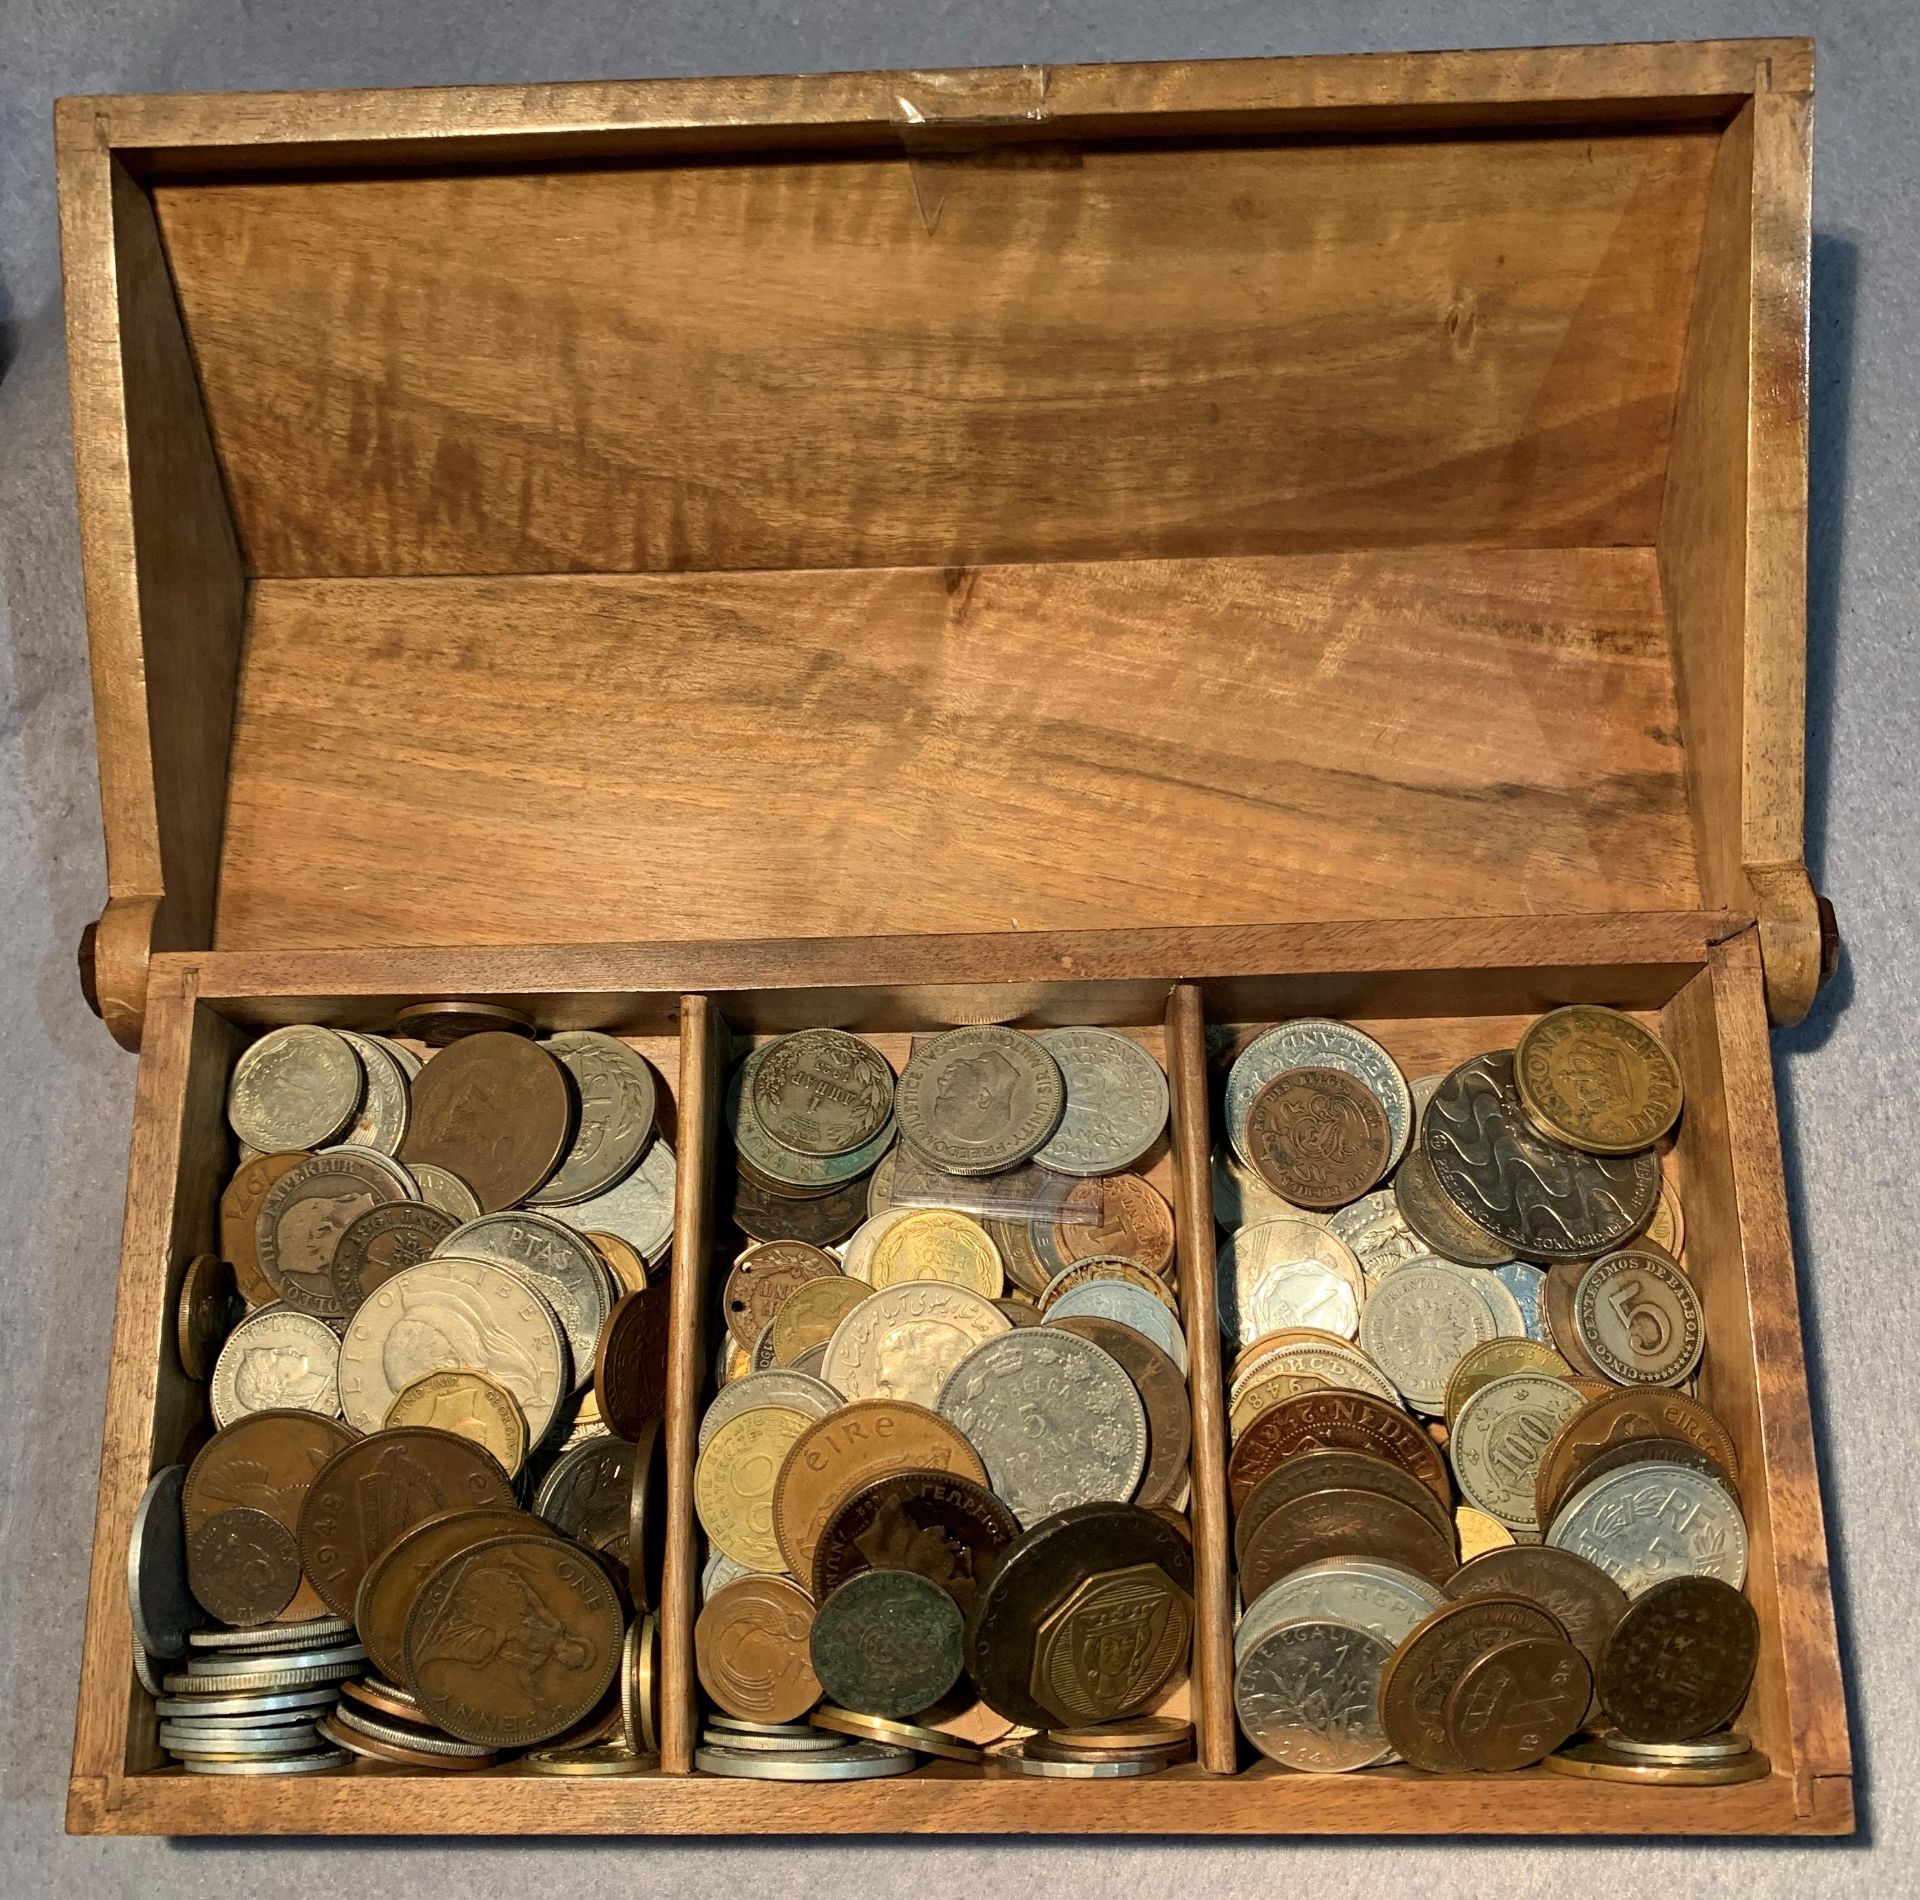 Contents to carved wooden box - assorted world coins